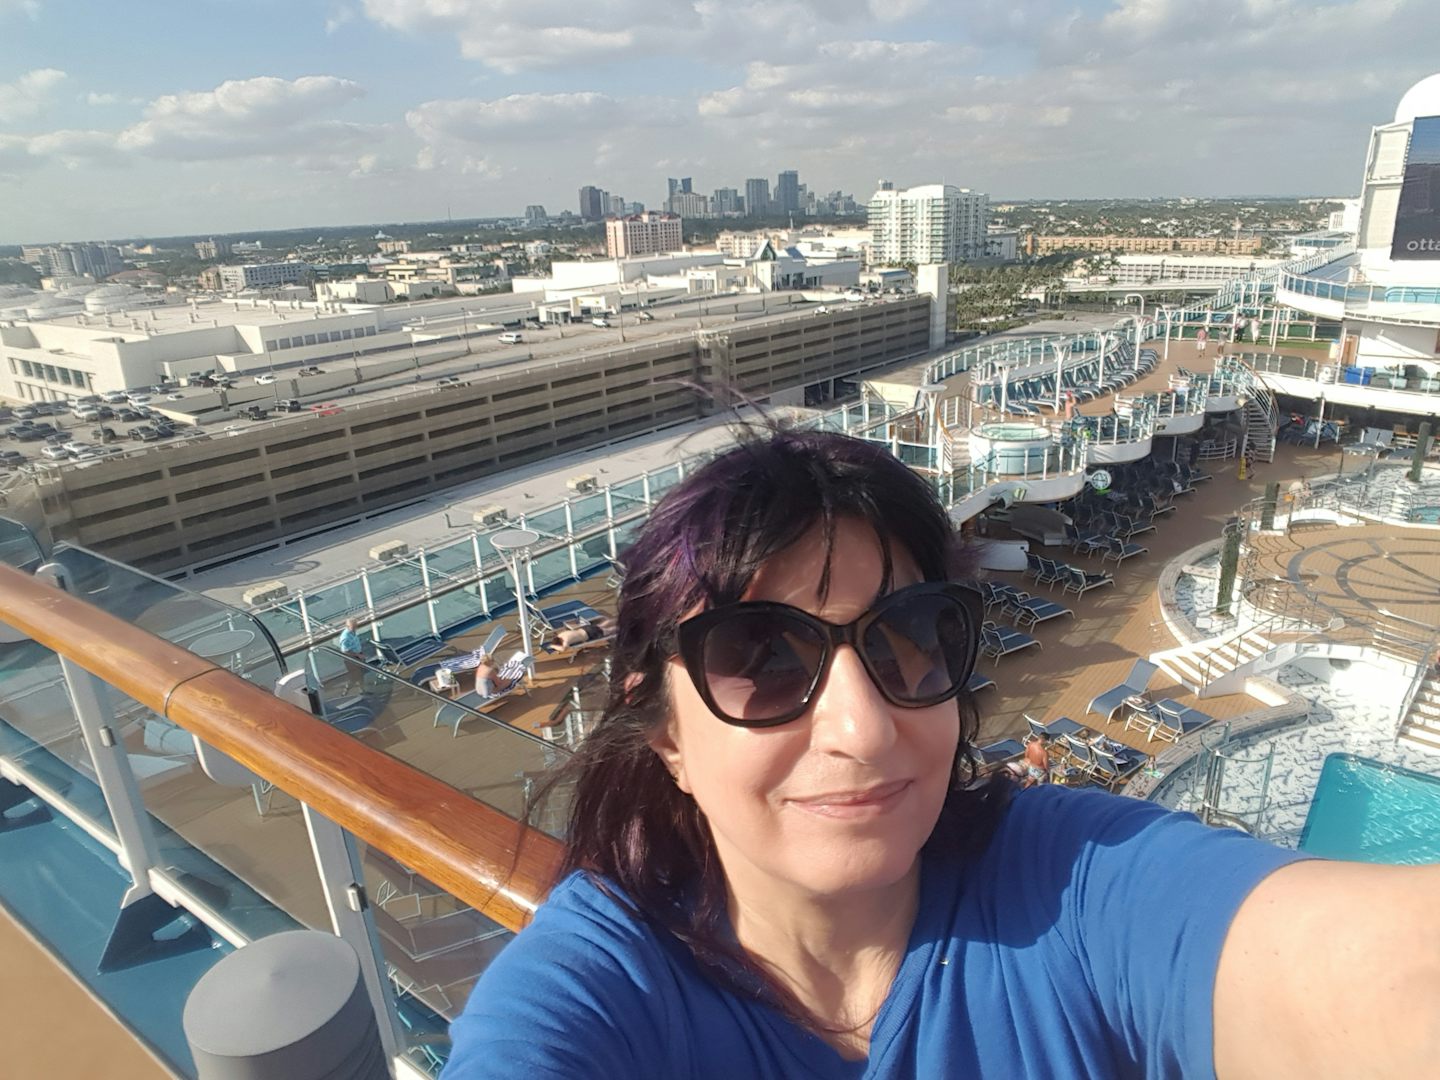 Sun Deck, setting sail from Fort Lauderdale